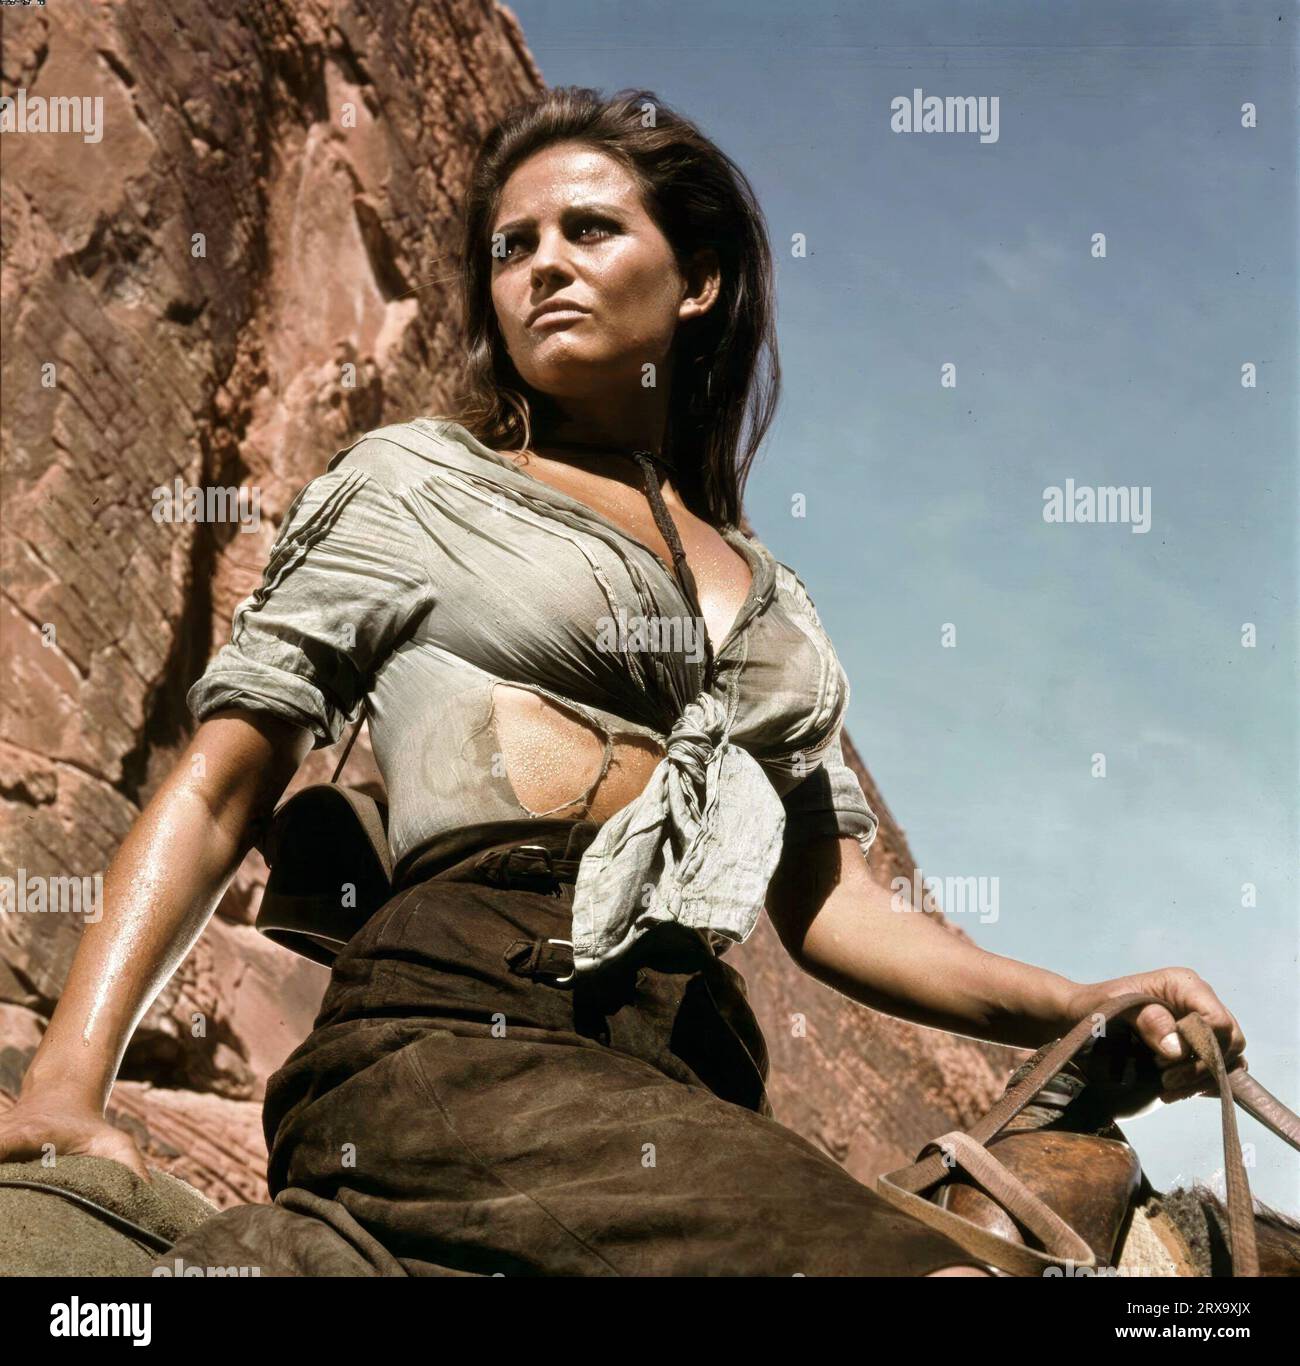 CLAUDIA CARDINALE in THE PROFESSIONALS (1966), directed by RICHARD BROOKS. Credit: COLUMBIA PICTURES / Album Stock Photo